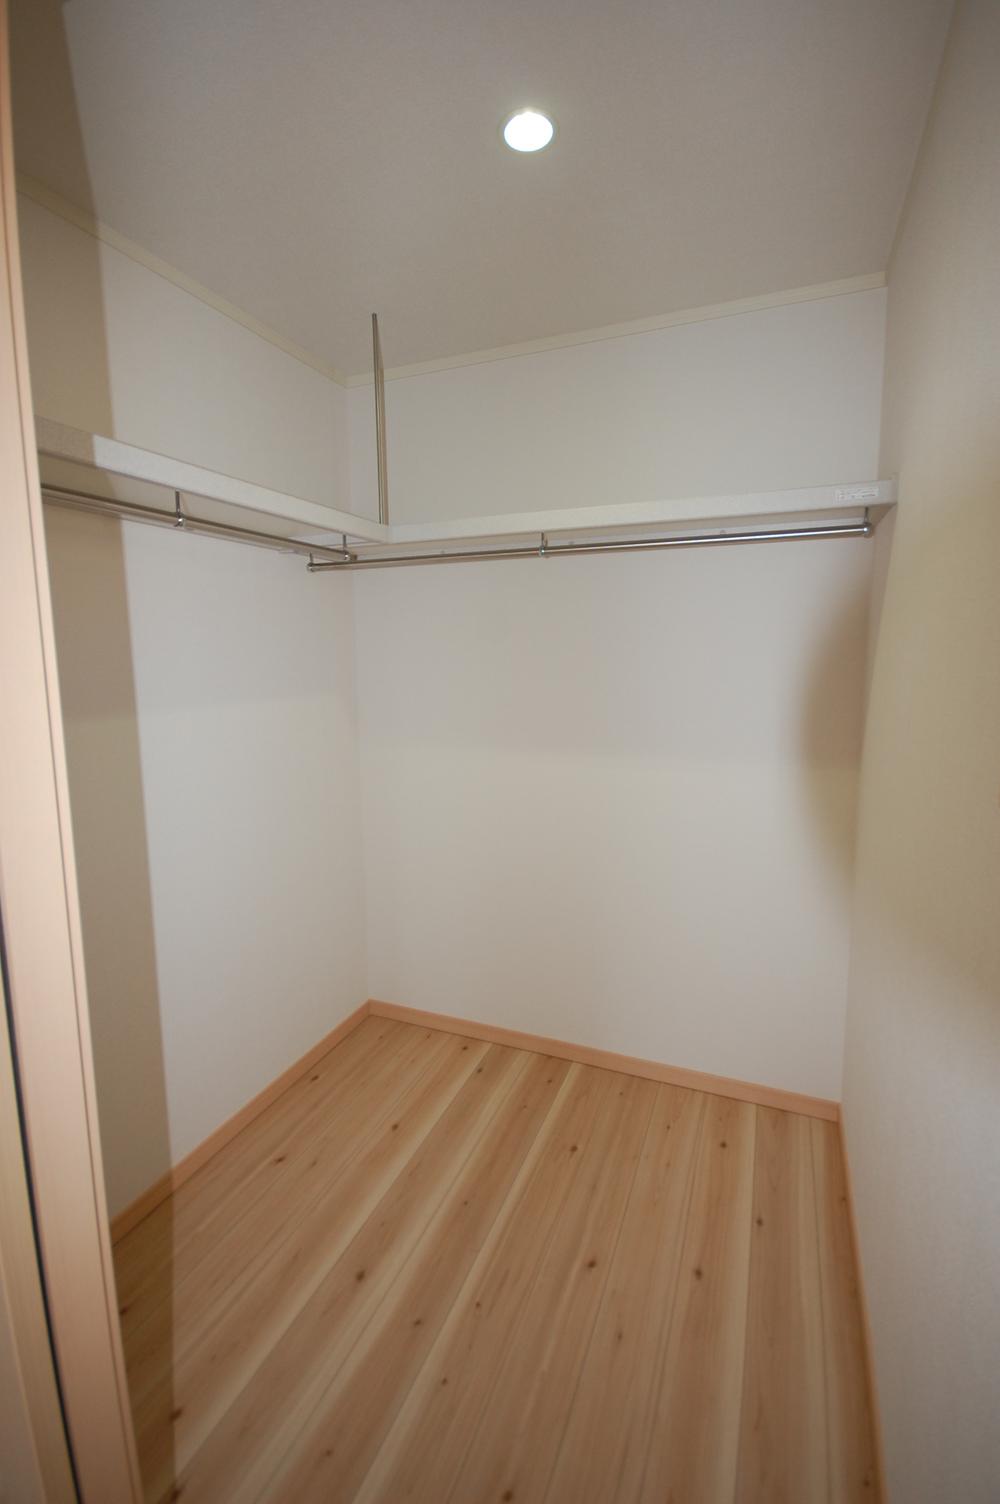 Other introspection. Building A walk-in closet 2 Pledge. It also attached storage rich window, Not troubled to ventilation. 